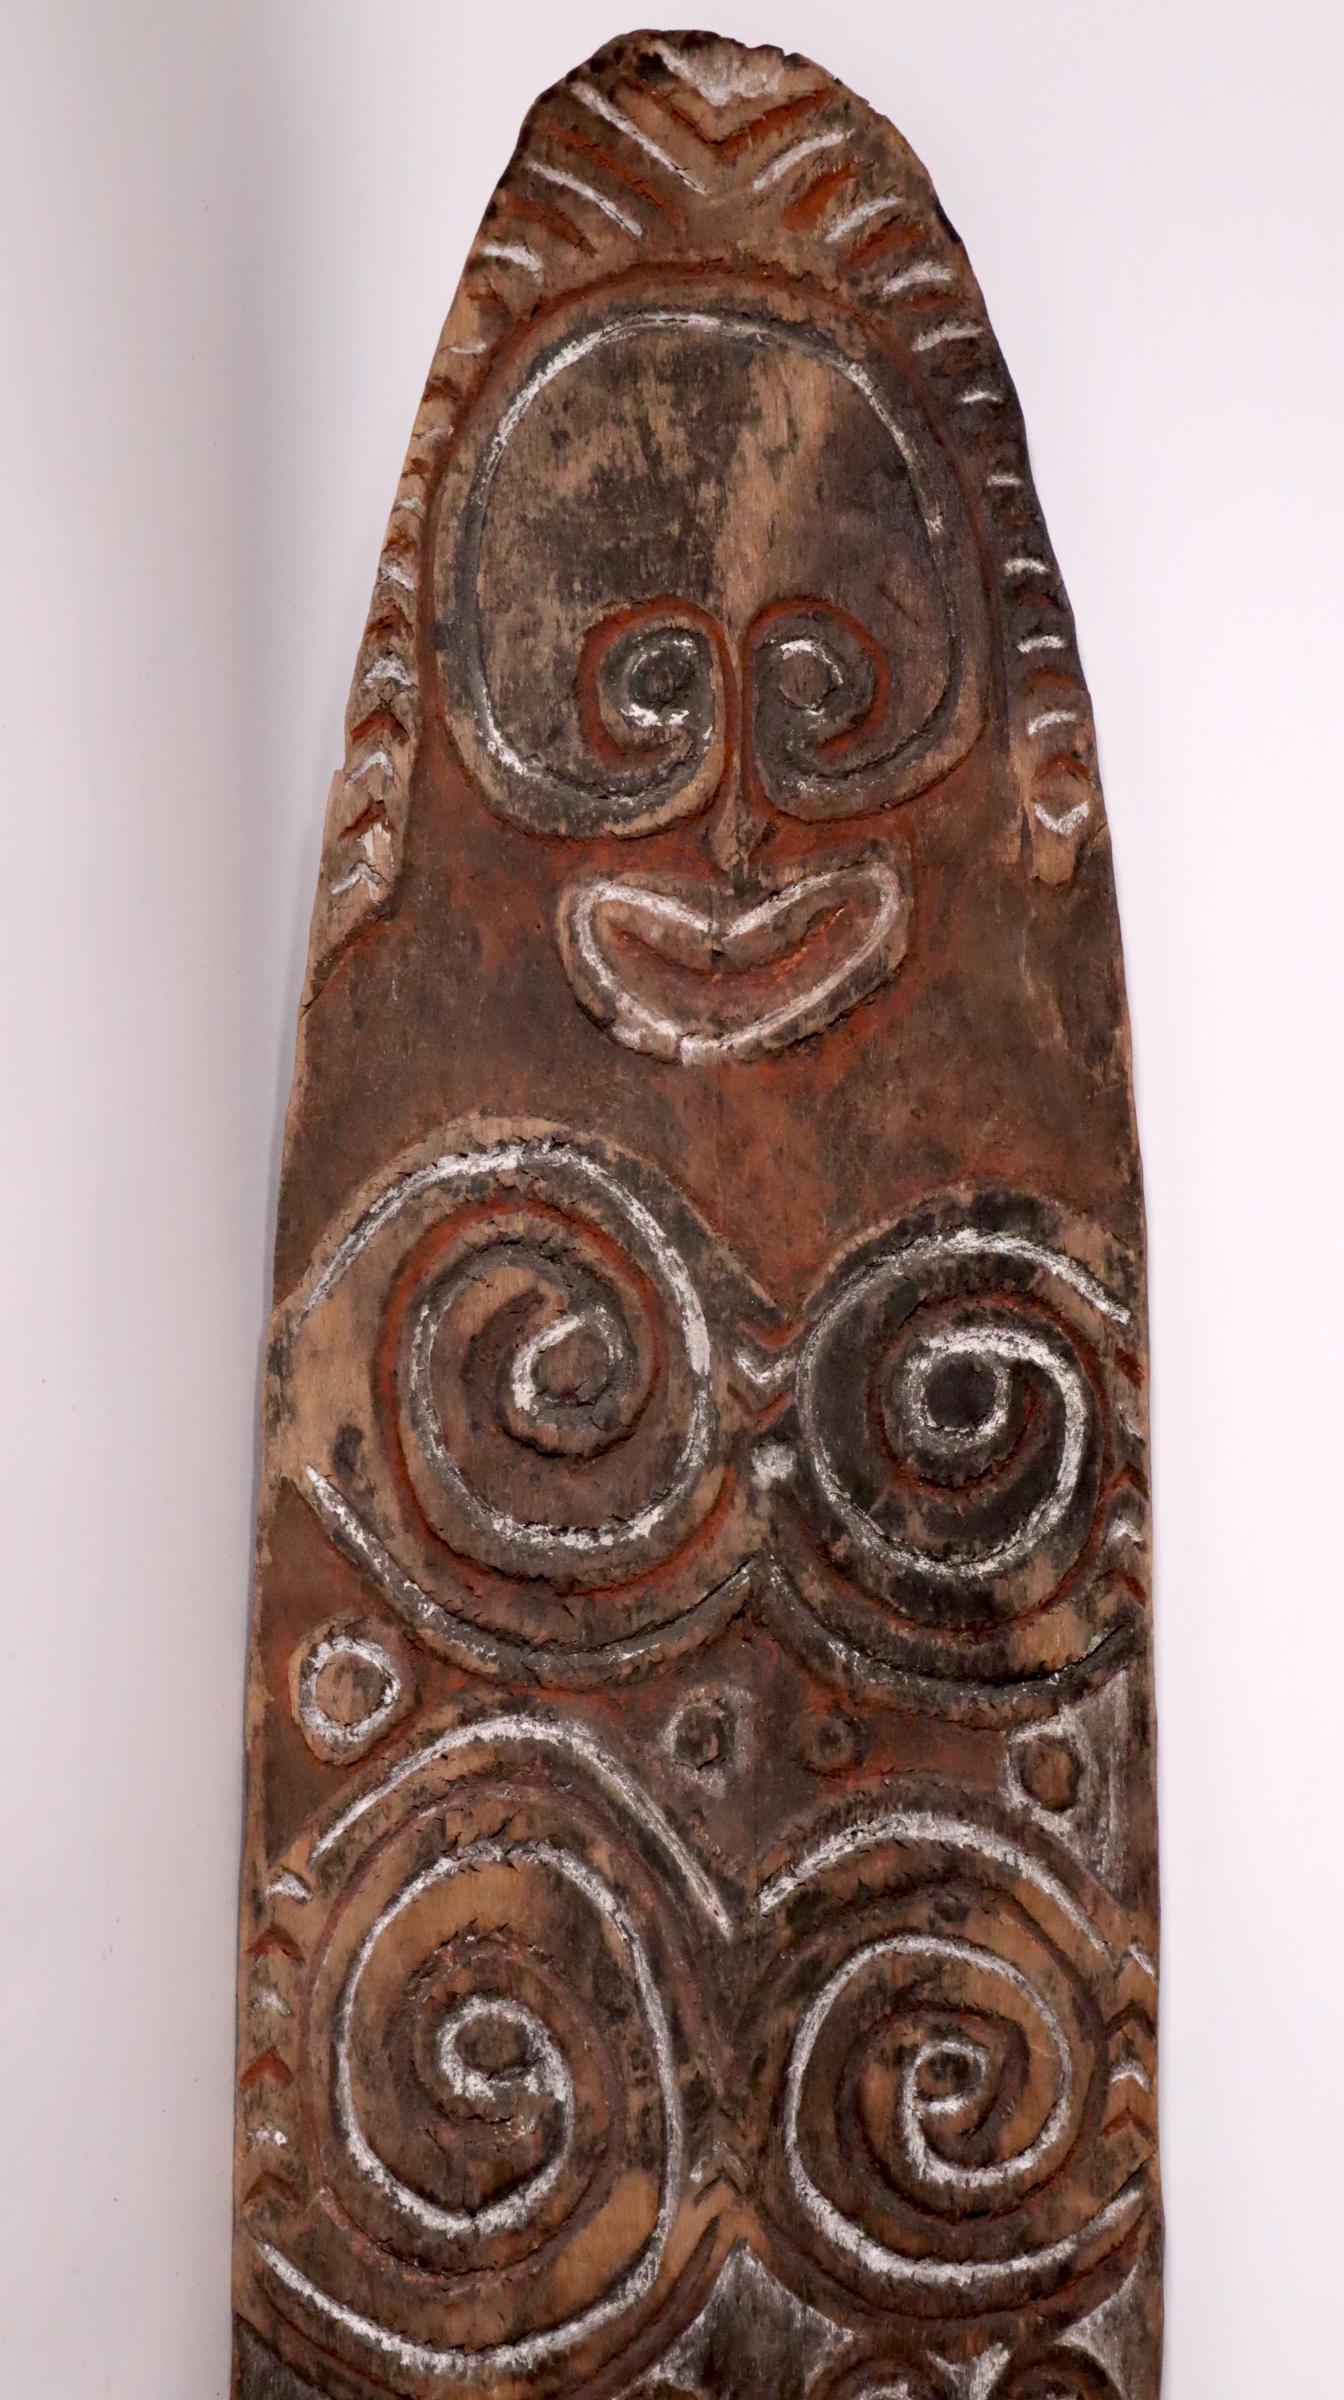 Papuan Gulf ancestor spirit board, called Gope, early 20th century. Wood with natural pigments and charcoal. An intriguing spirit carving, with good provenance. 1963 is a relatively early date for Papuan art to enter an American collection.